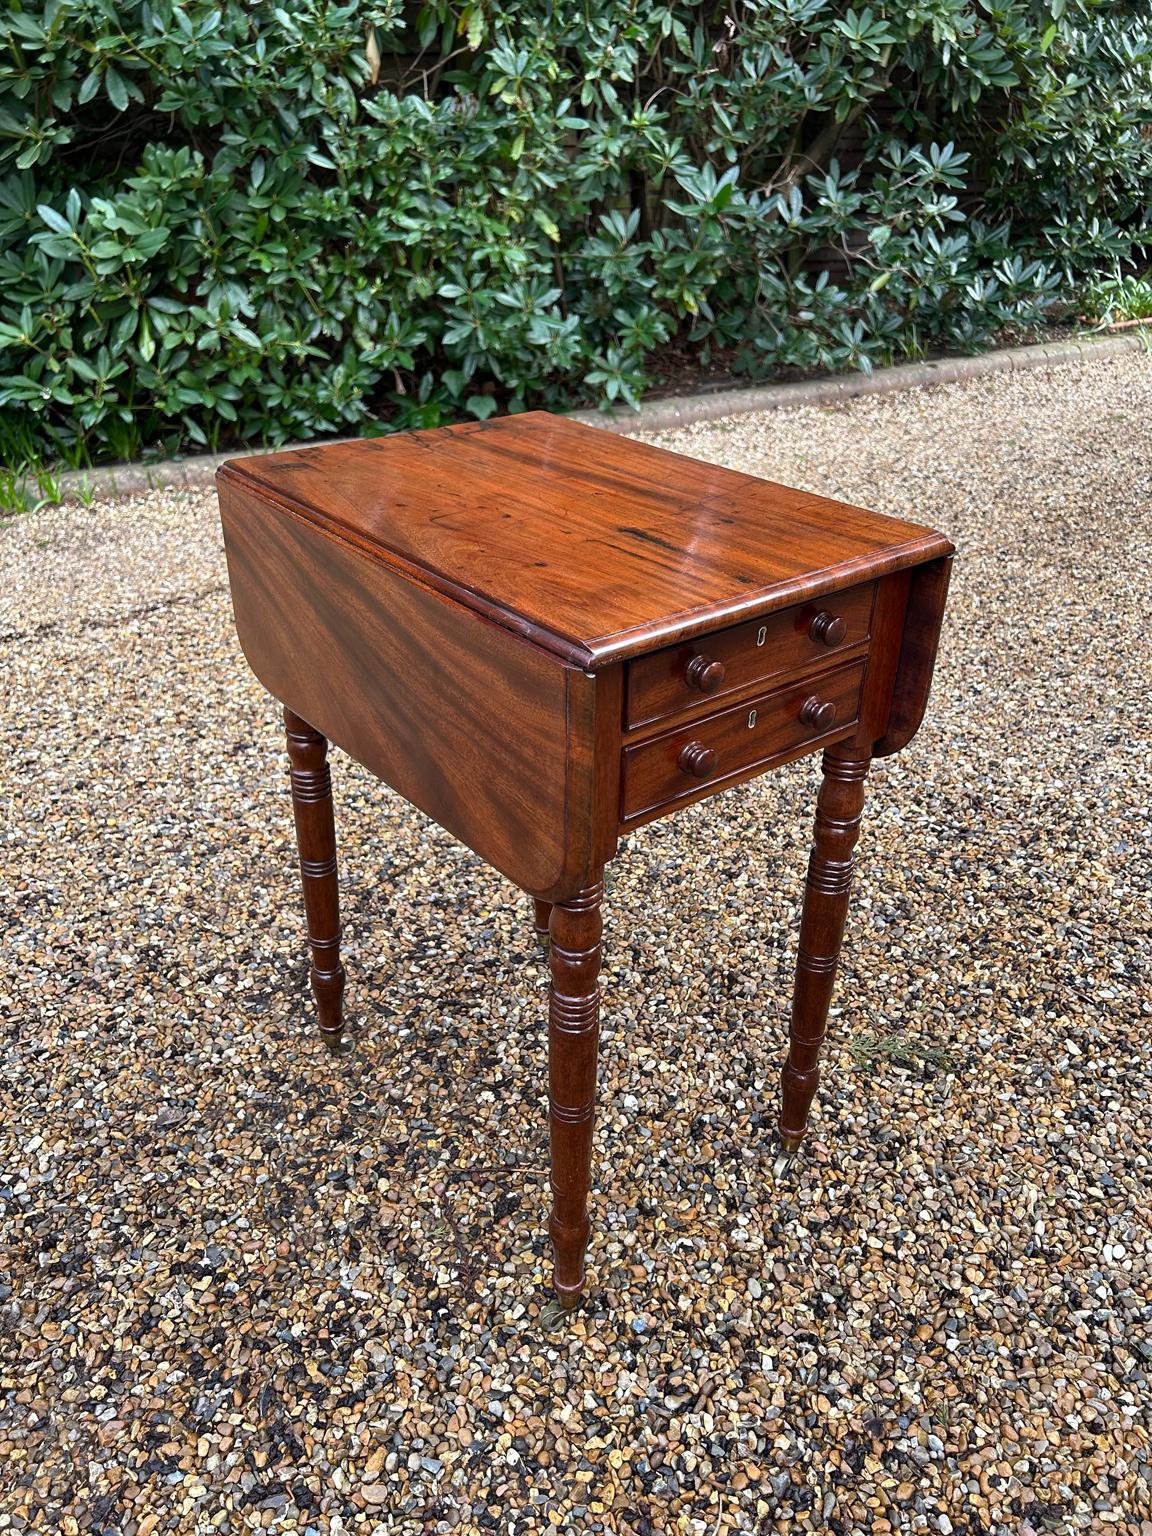 19th Century Georgian Mahogany Drop Leaf Work Table In Good Condition For Sale In Richmond, Surrey